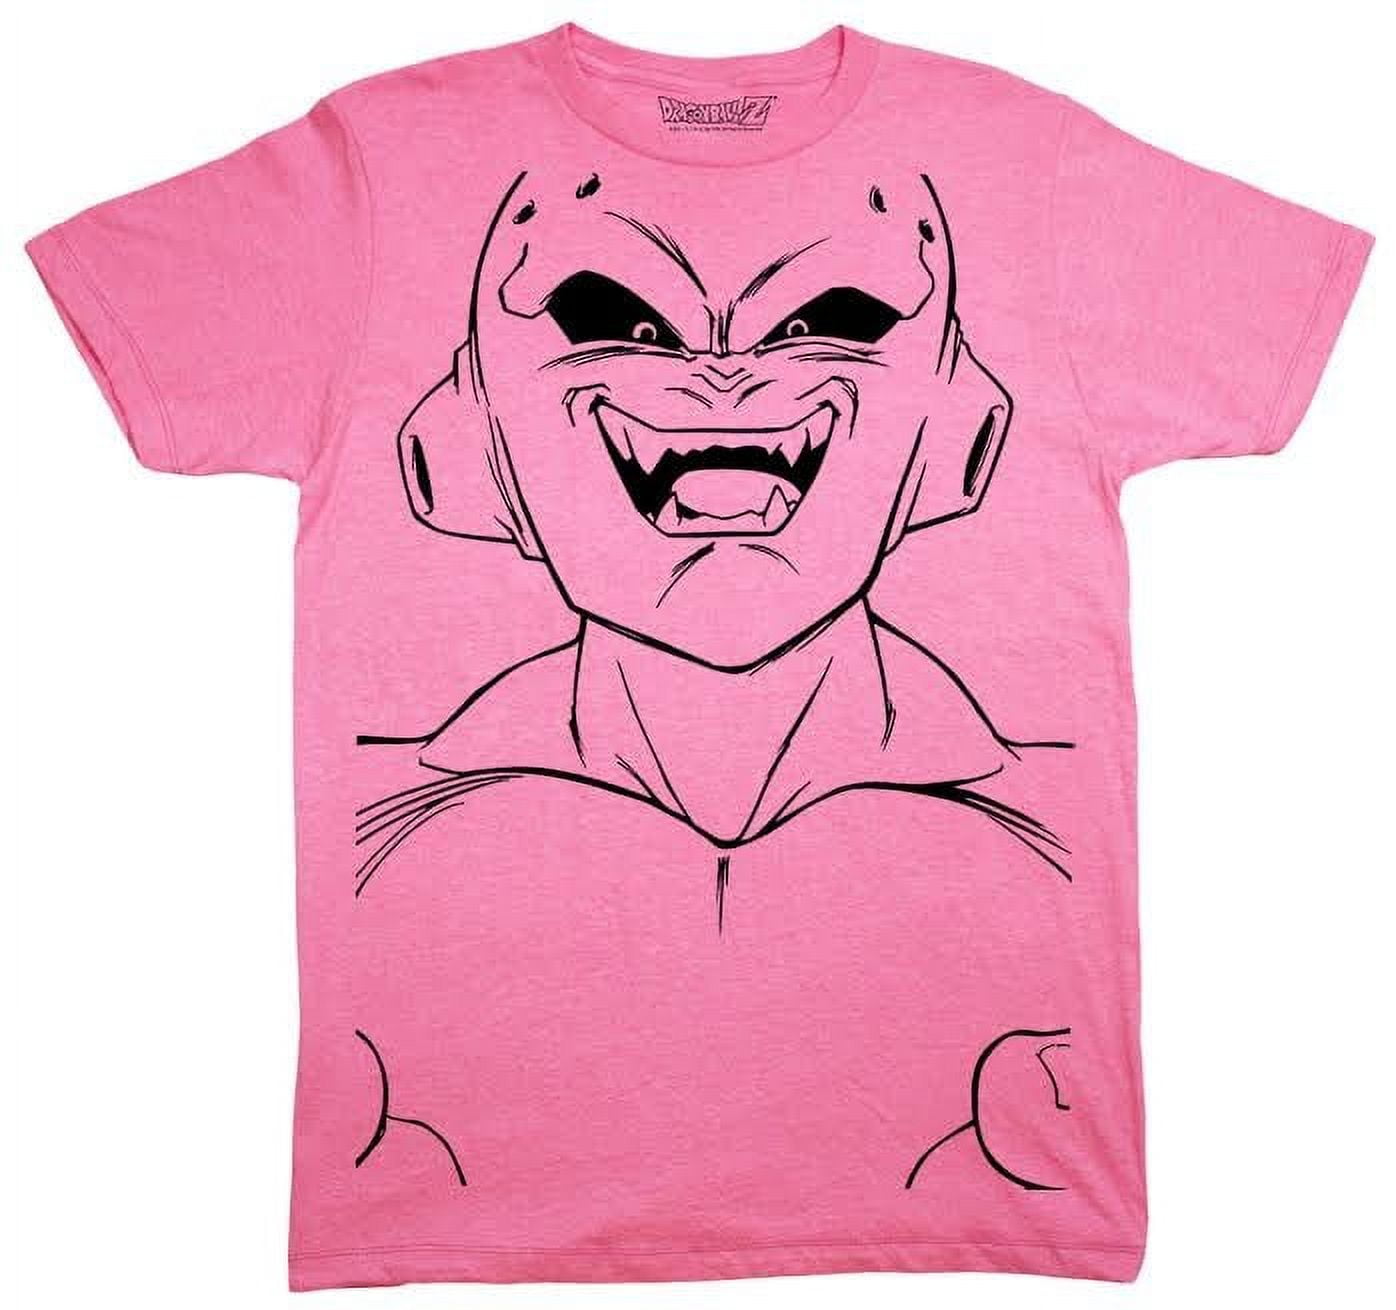 Majin Buu - Visit now for 3D Dragon Ball Z shirts now on sale